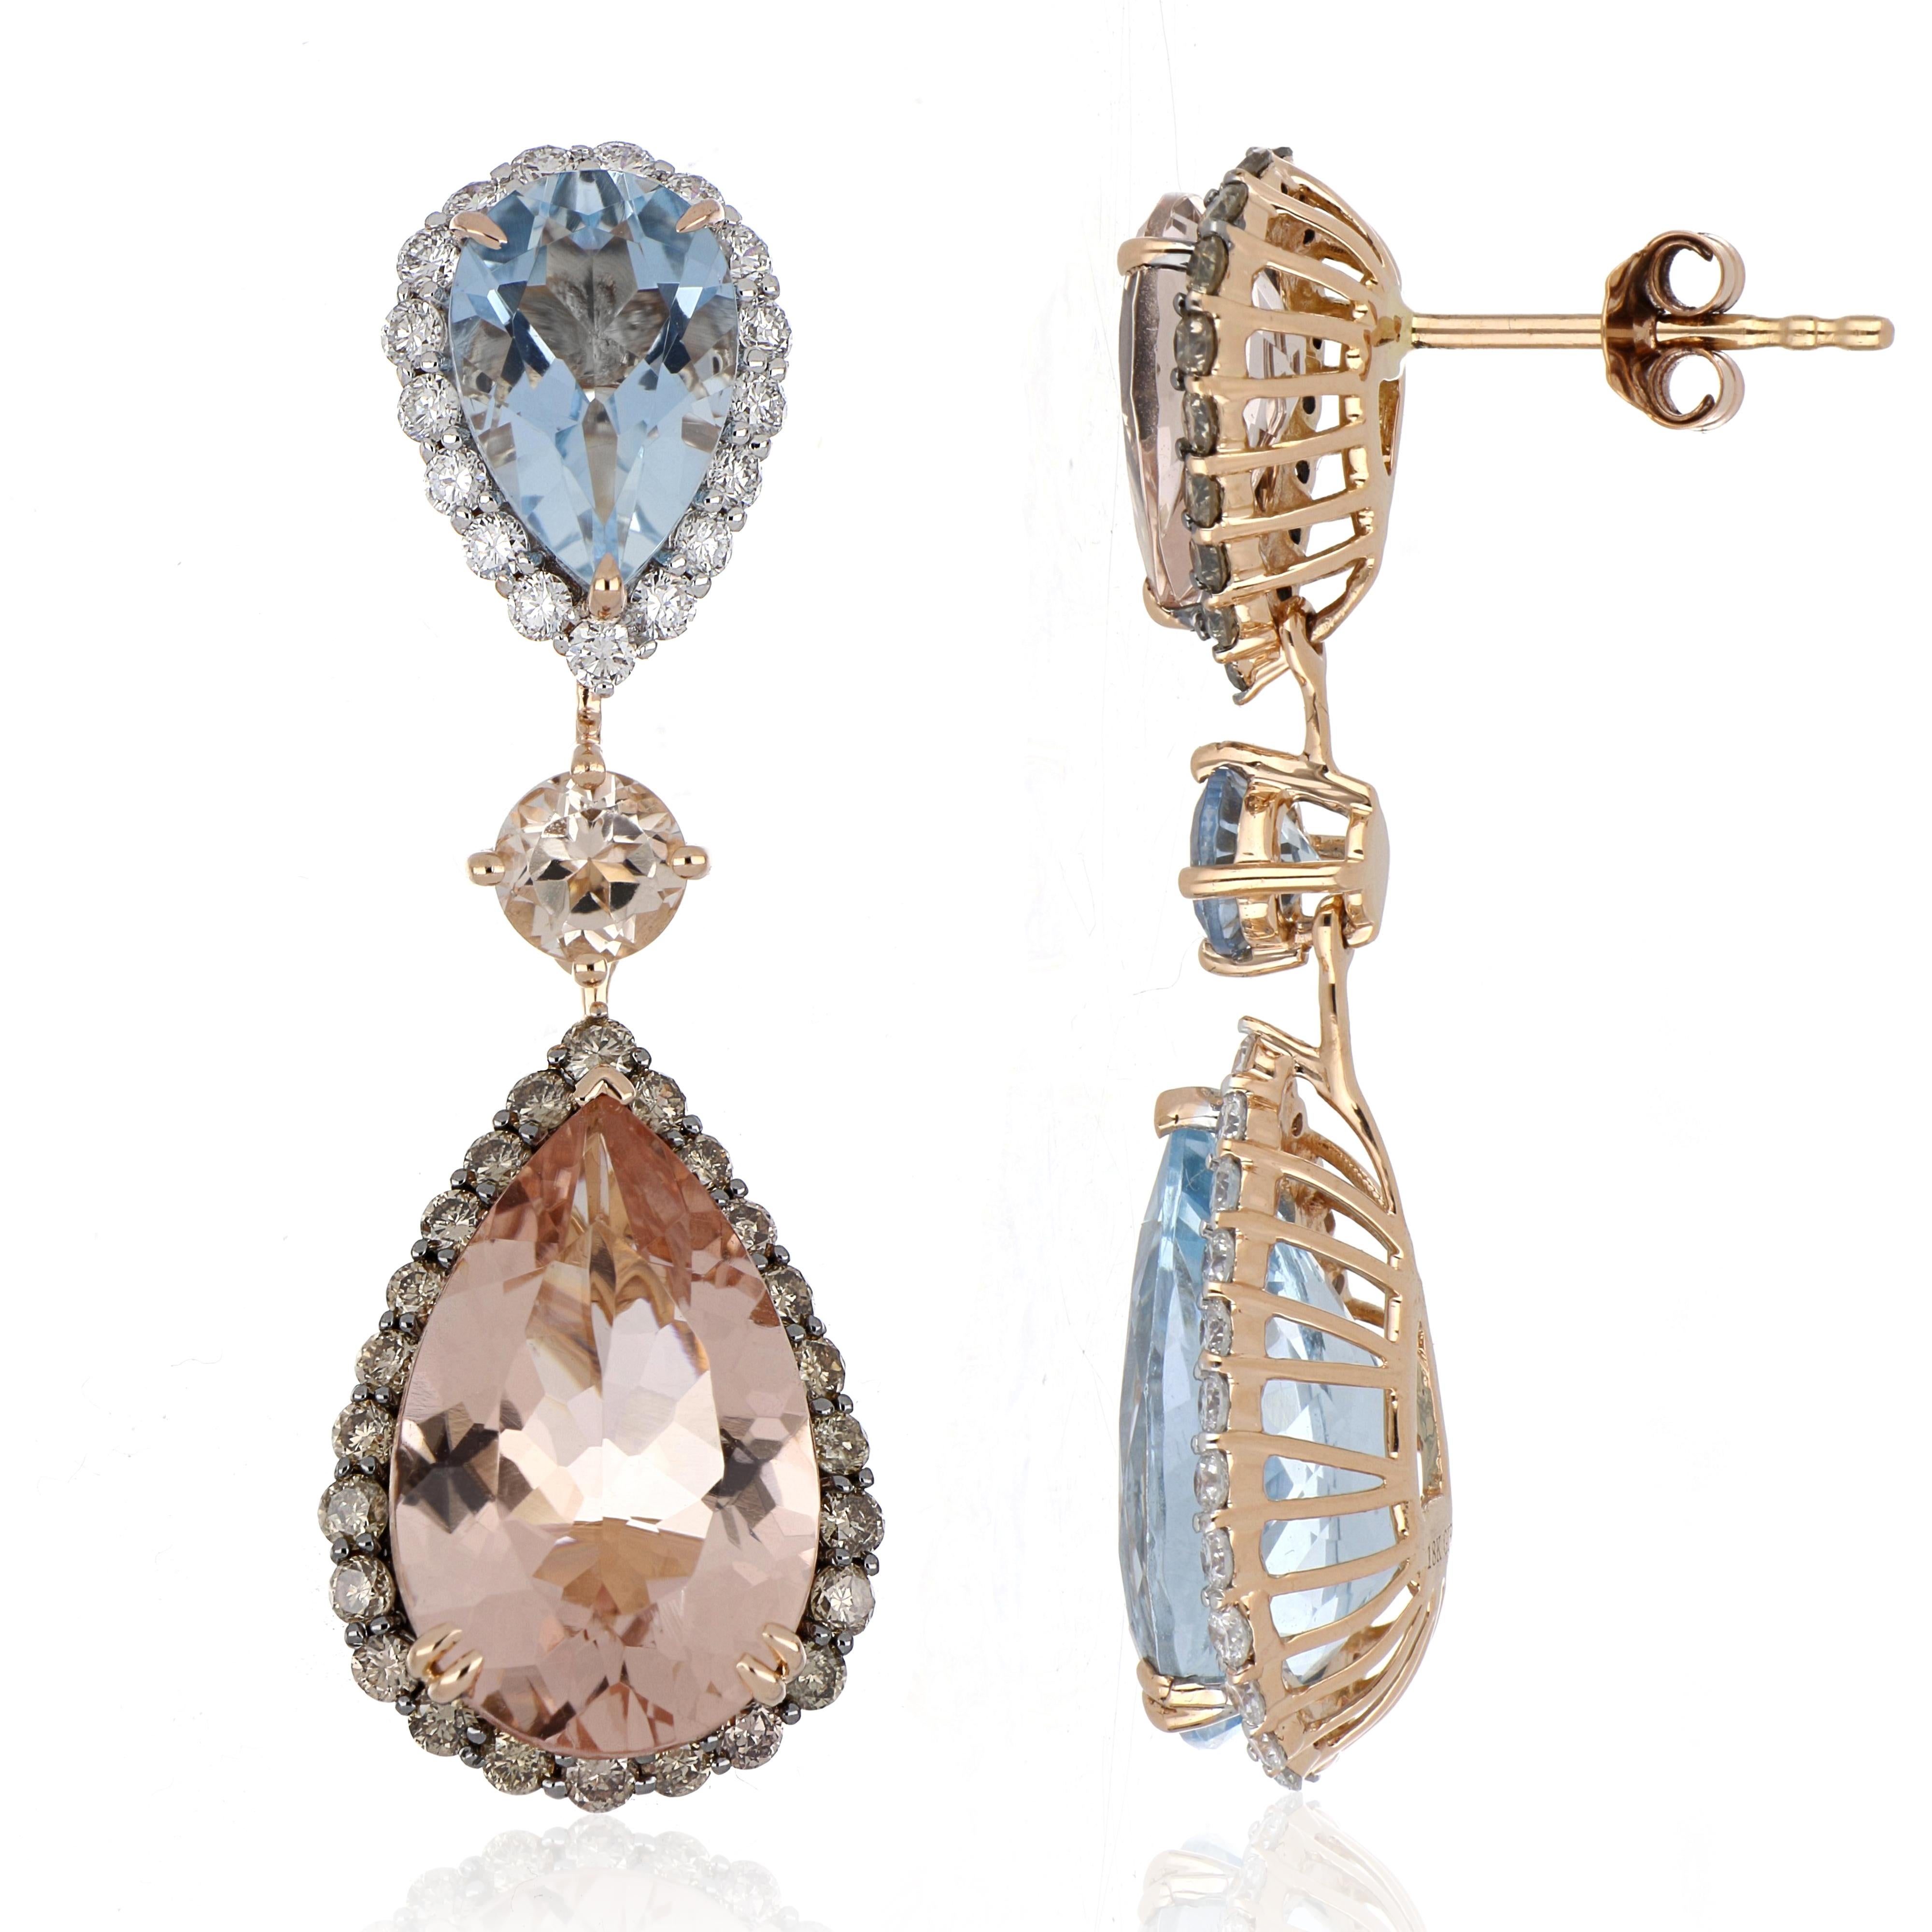 Elegant and Exquisitely detailed Mismatched Dangling Gold Earrings, set with 4.85 Ct (total ) Morganites,  5.20 Cts (total)  Aquamarine, accented with micro pave White and Chocolate Diamonds, weighing approx. 1.23 Cts. total carat weight.